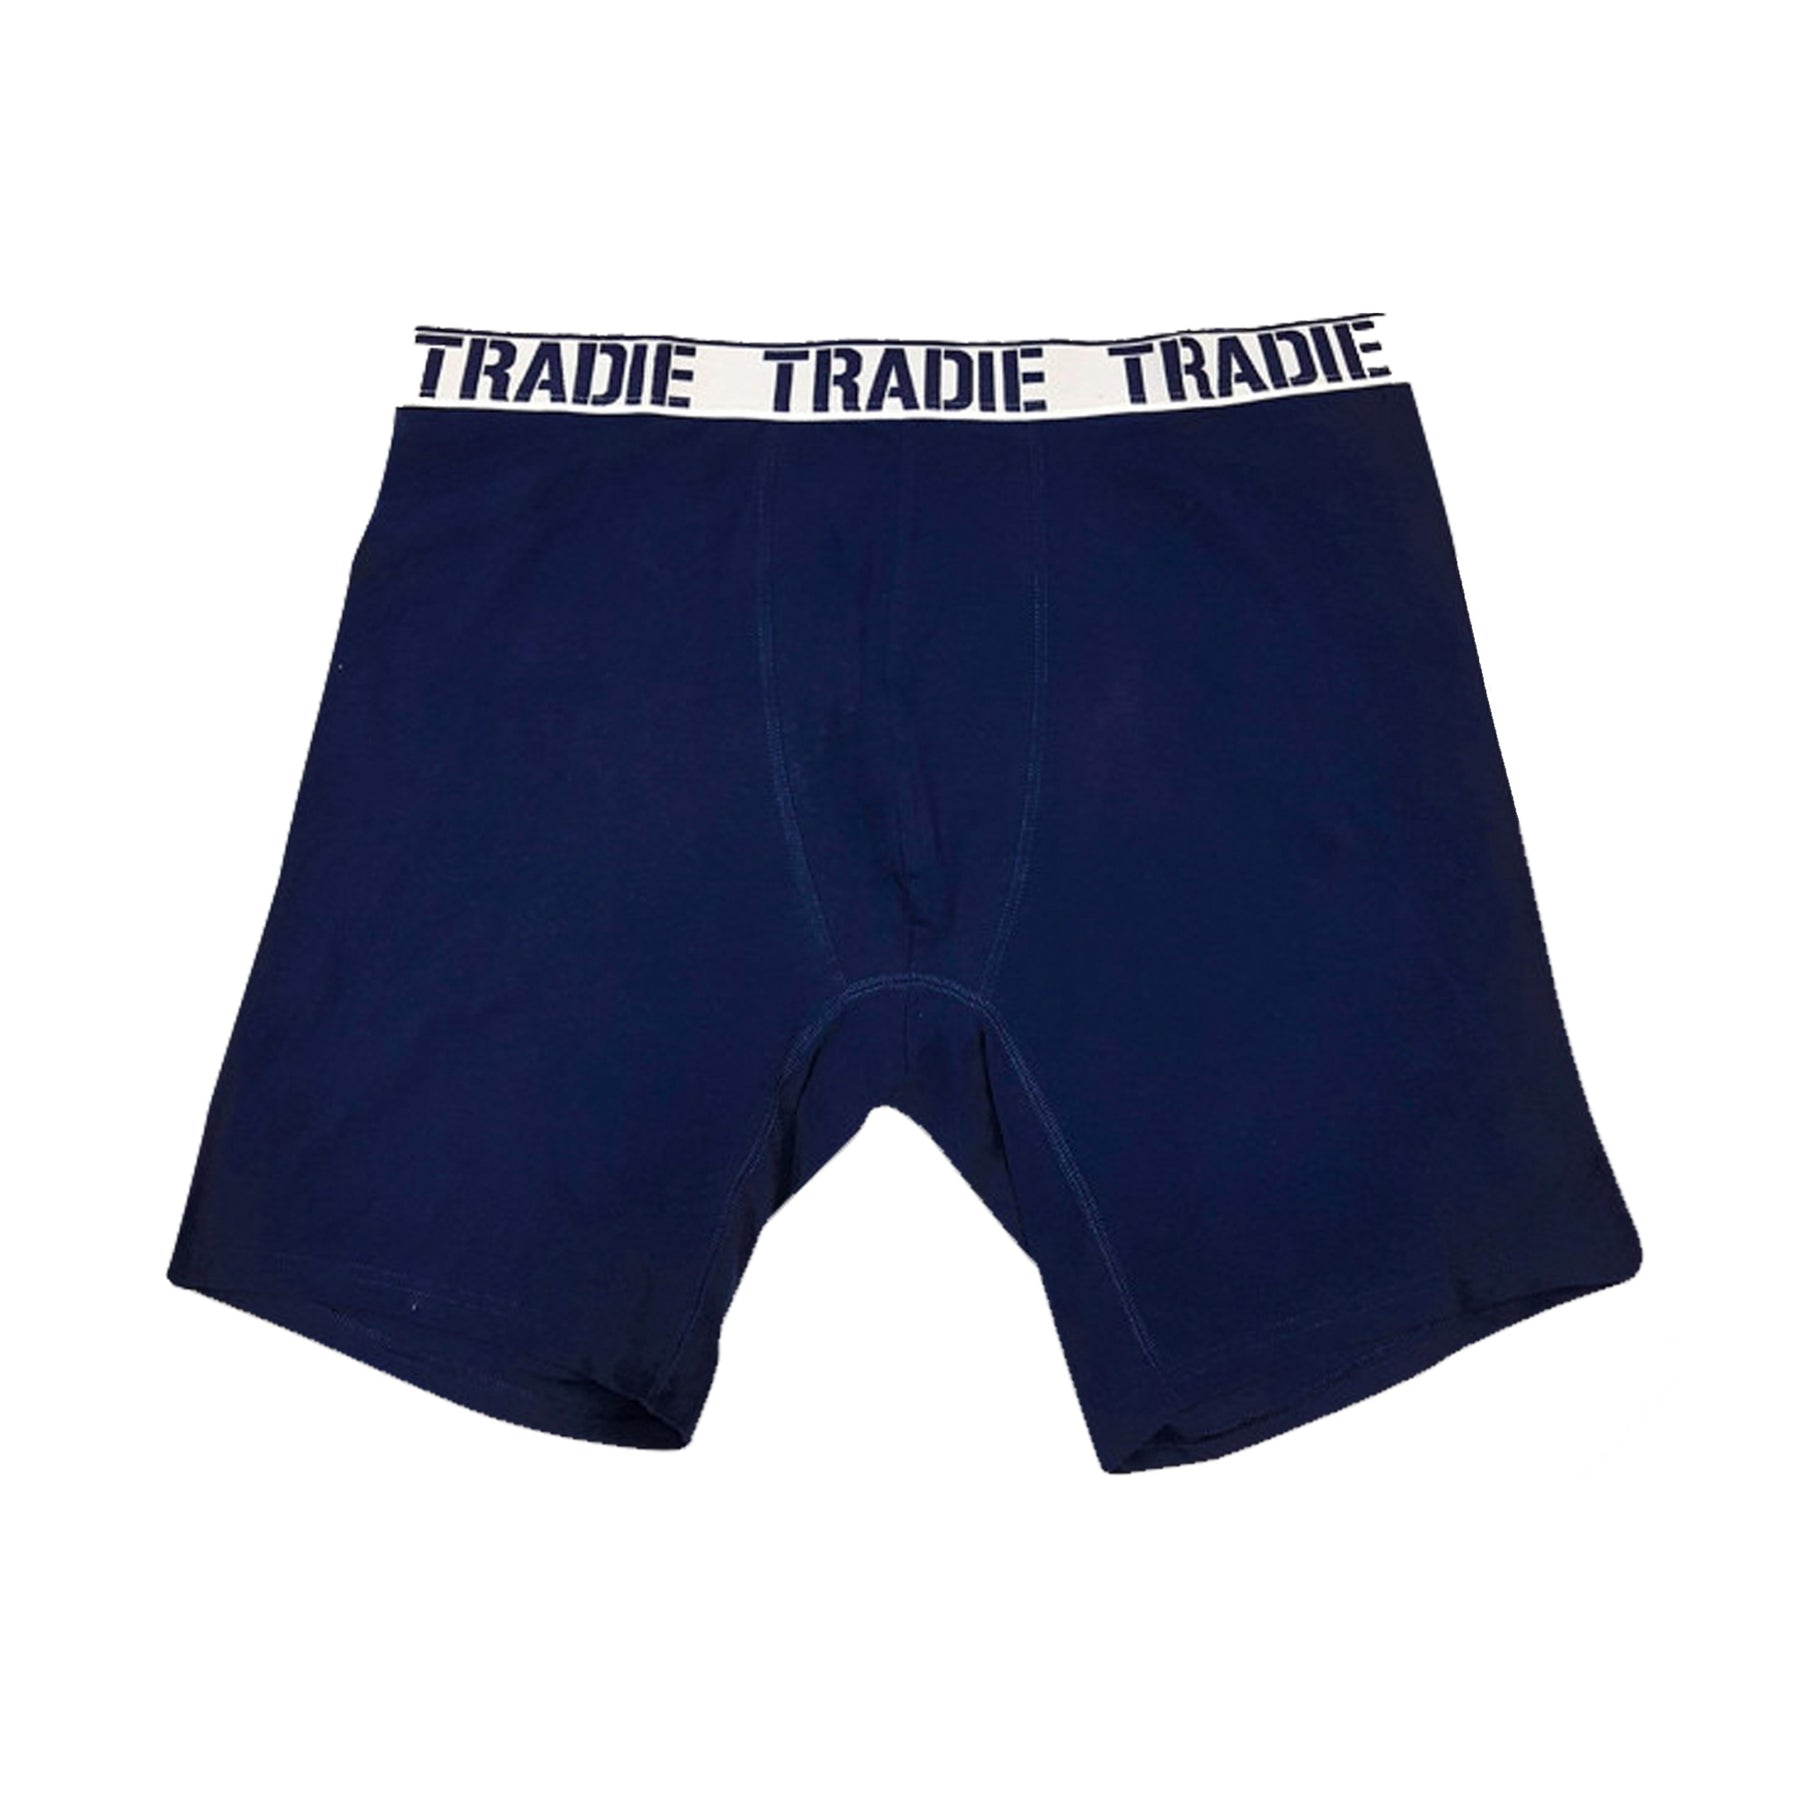 Sold at Auction: Assorted men's underwear size L marked Tradie, Step One  etc.